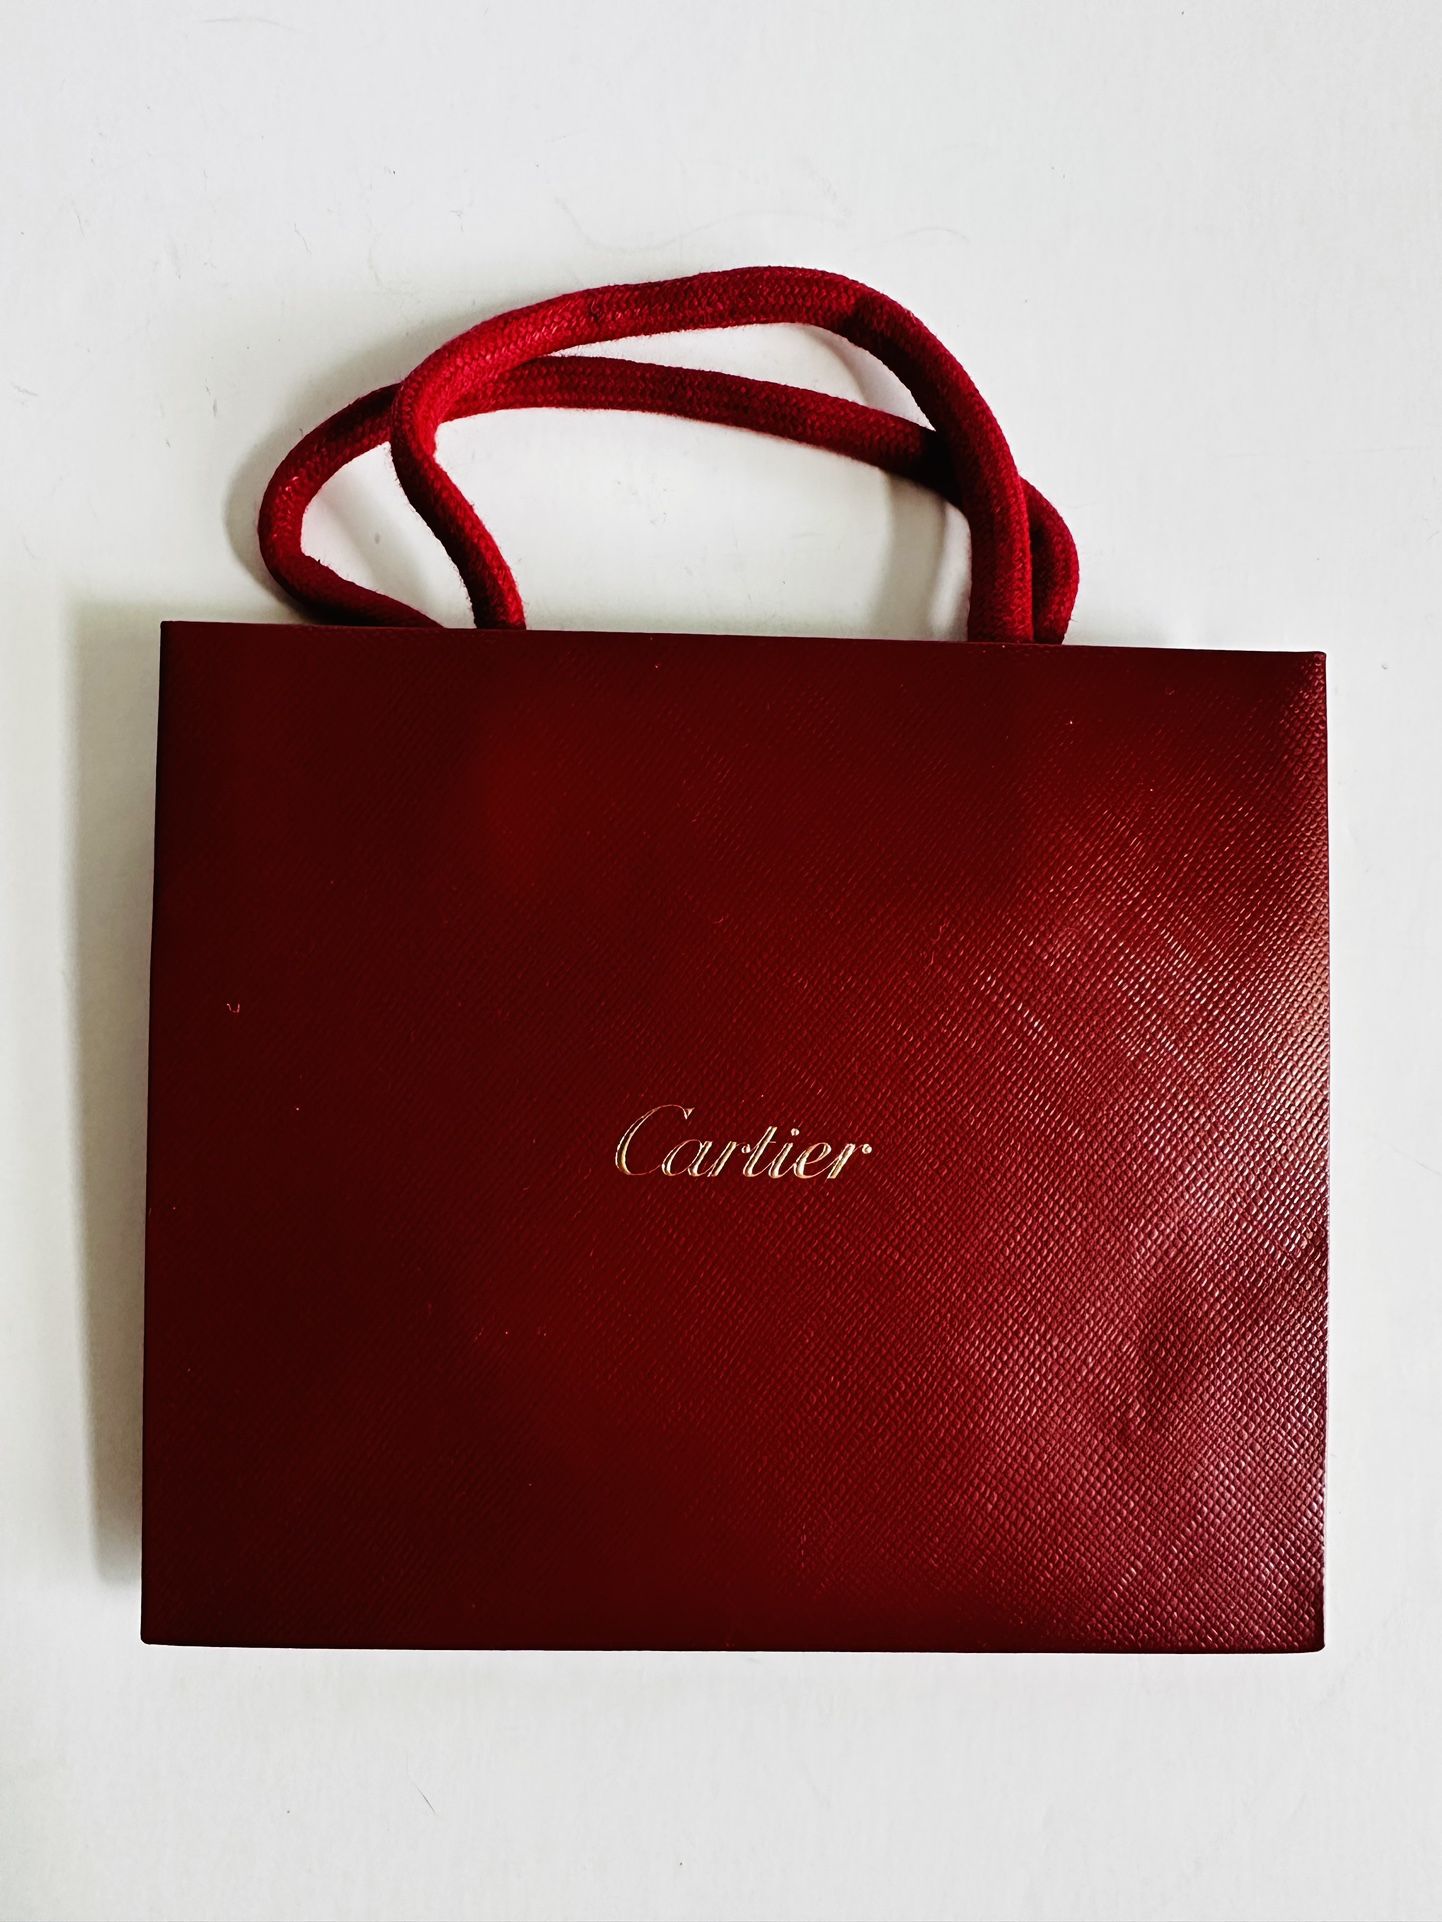 Authentic Cartier Paper Shopping Bag - multiple sizes available